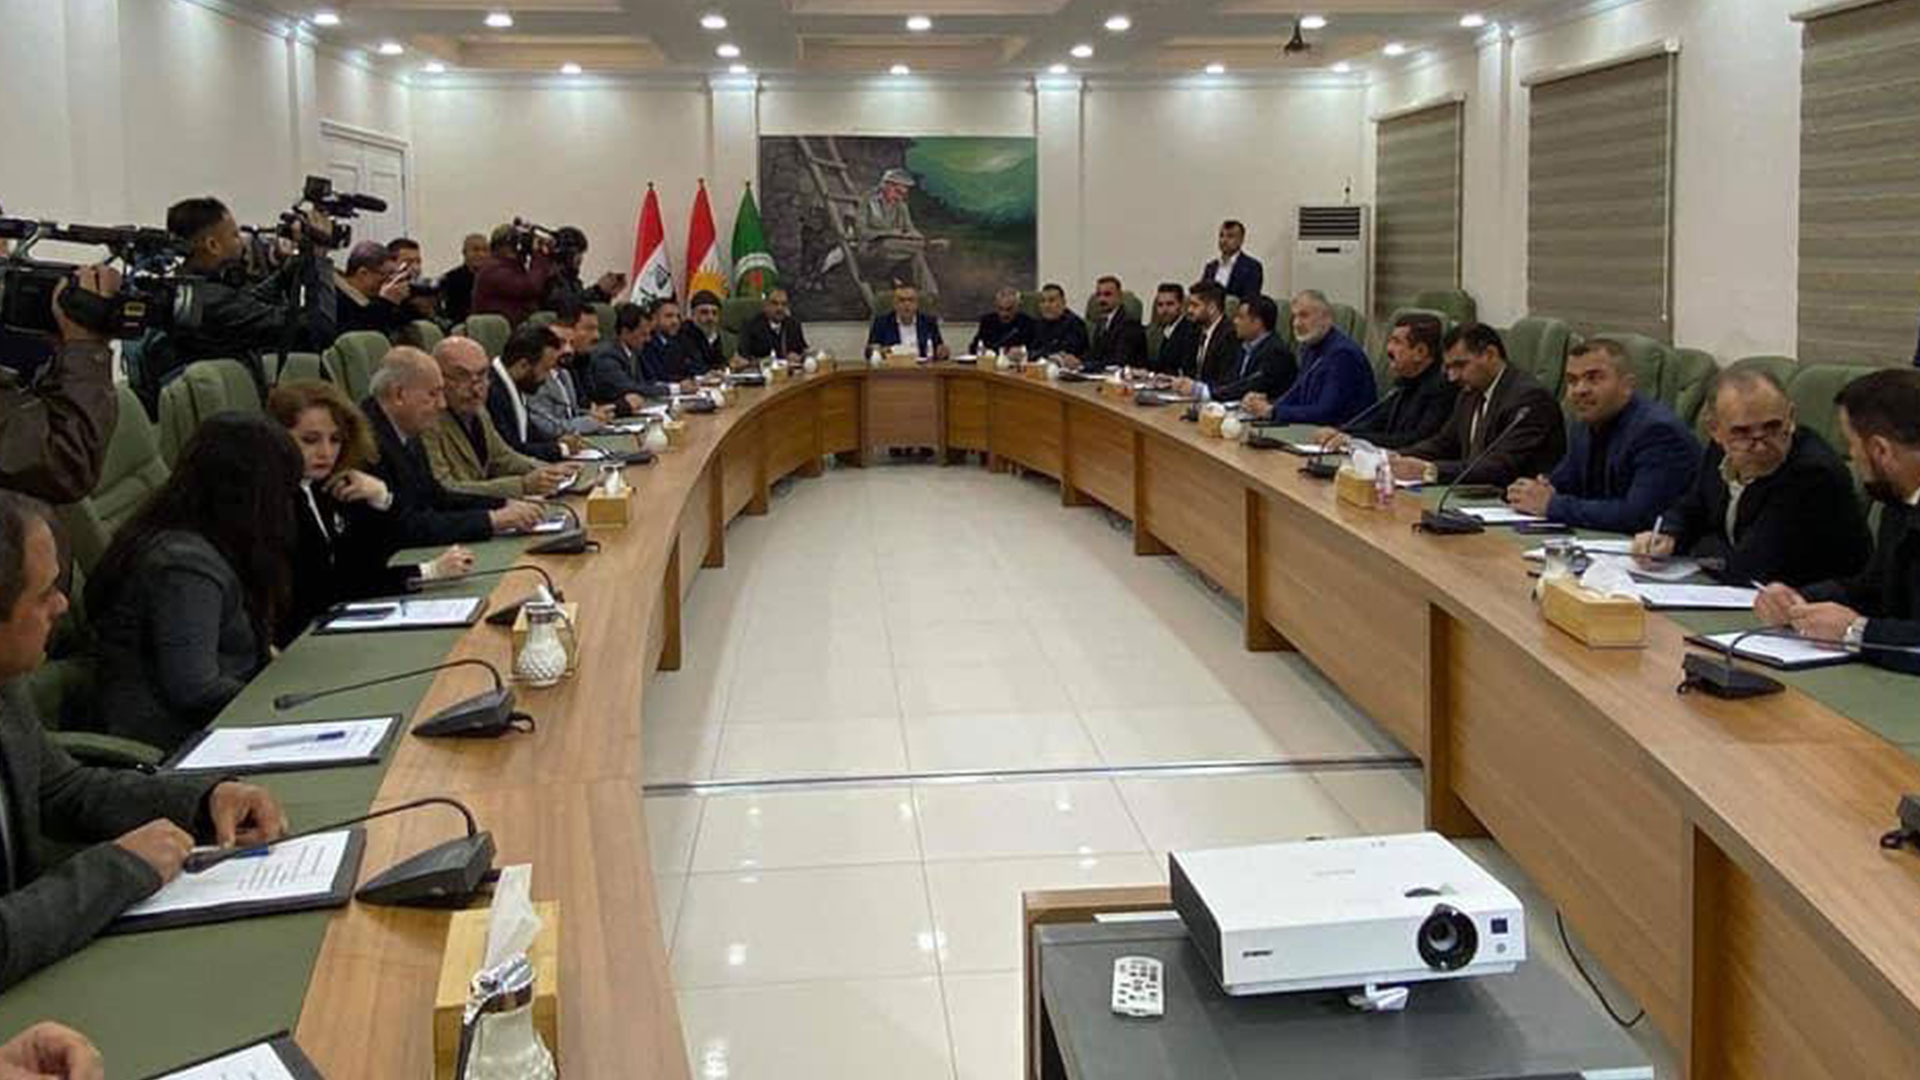 Article 140's implementation is supported by 14 Kurdish parties